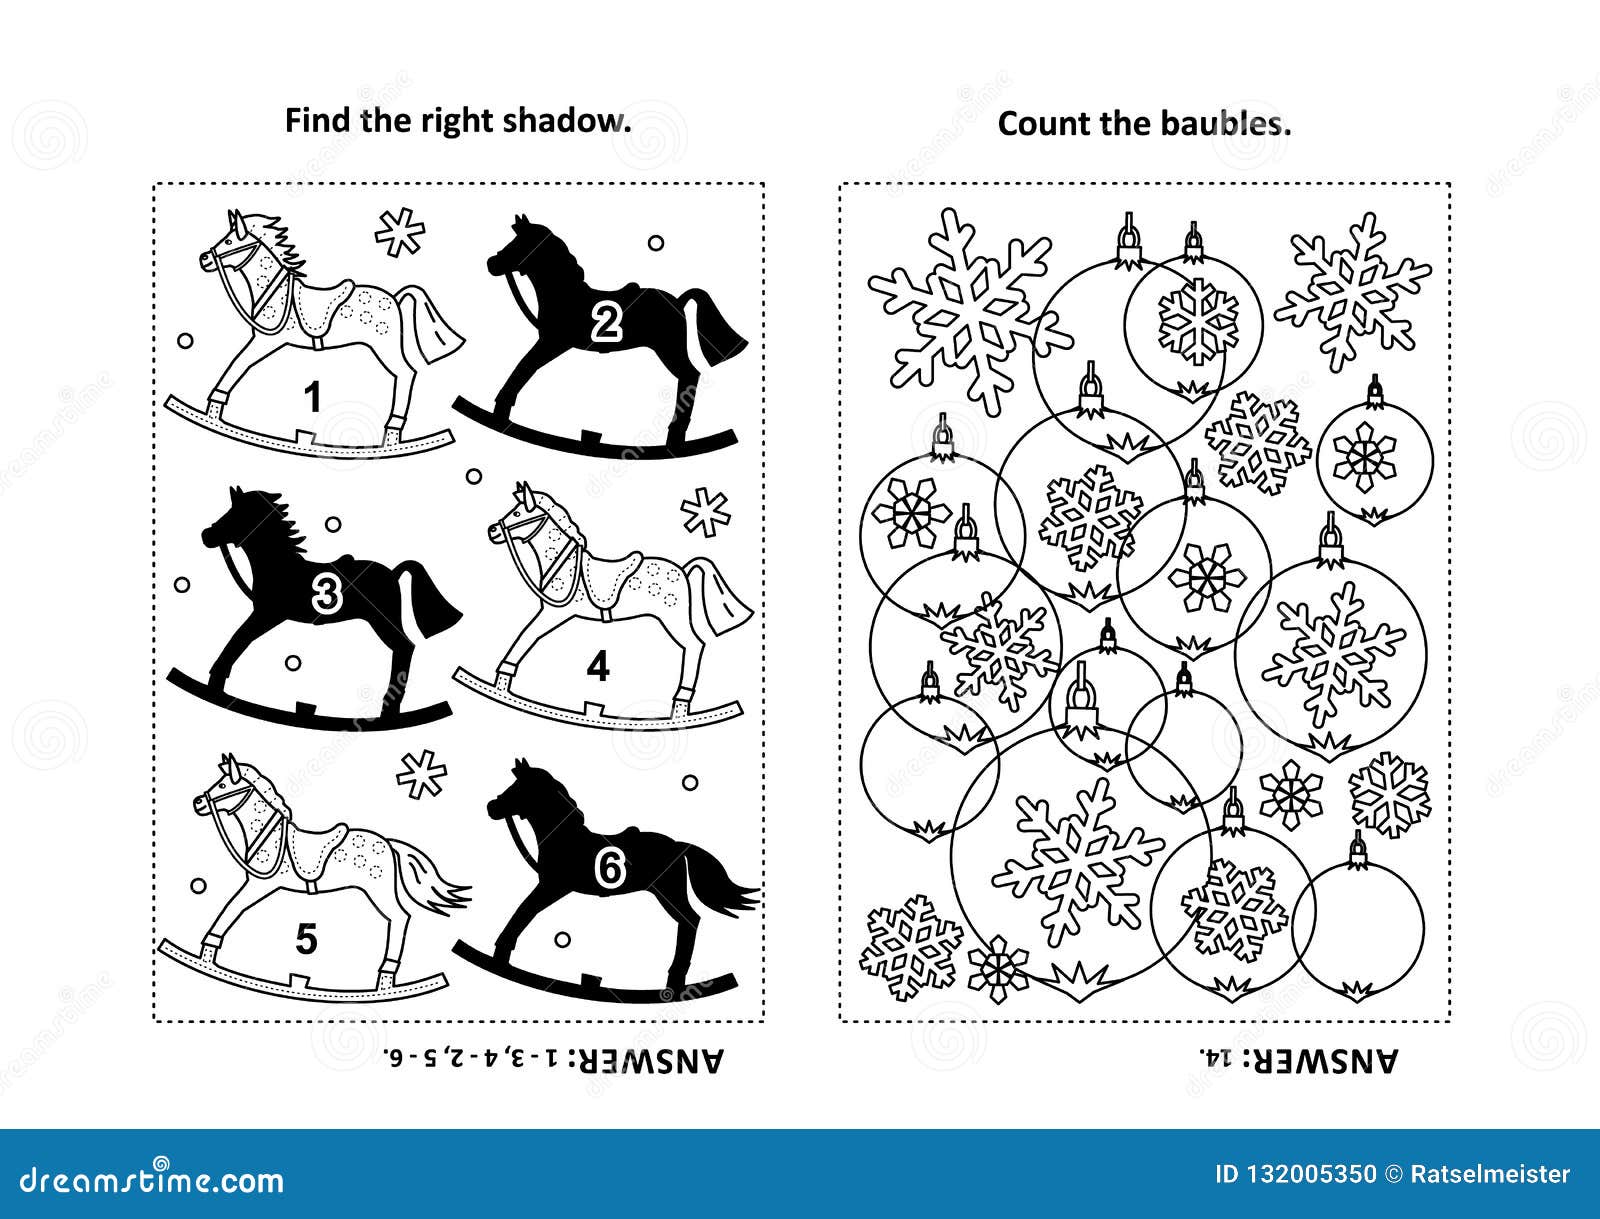 Activity page for kids with puzzles and coloring